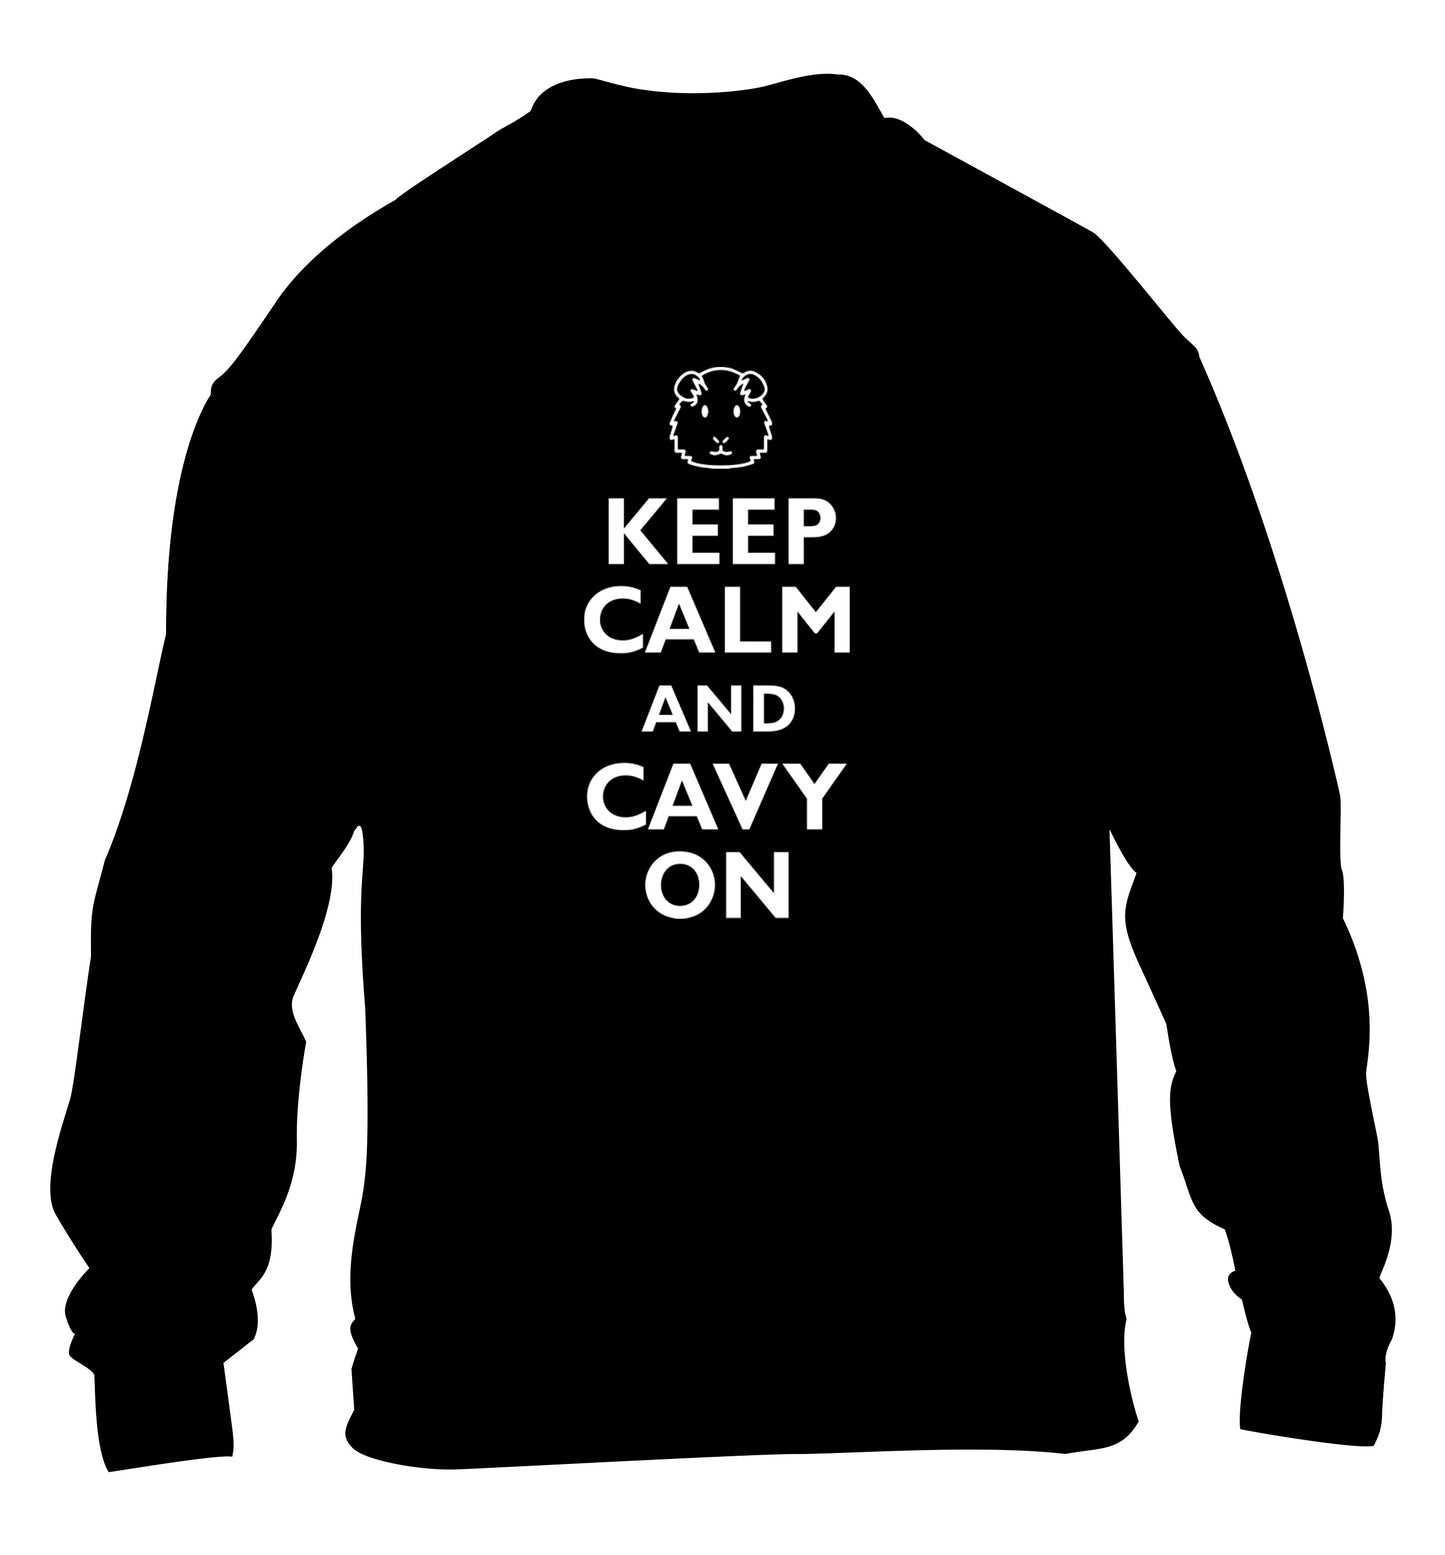 Keep calm and cavvy on children's black  sweater 12-14 Years